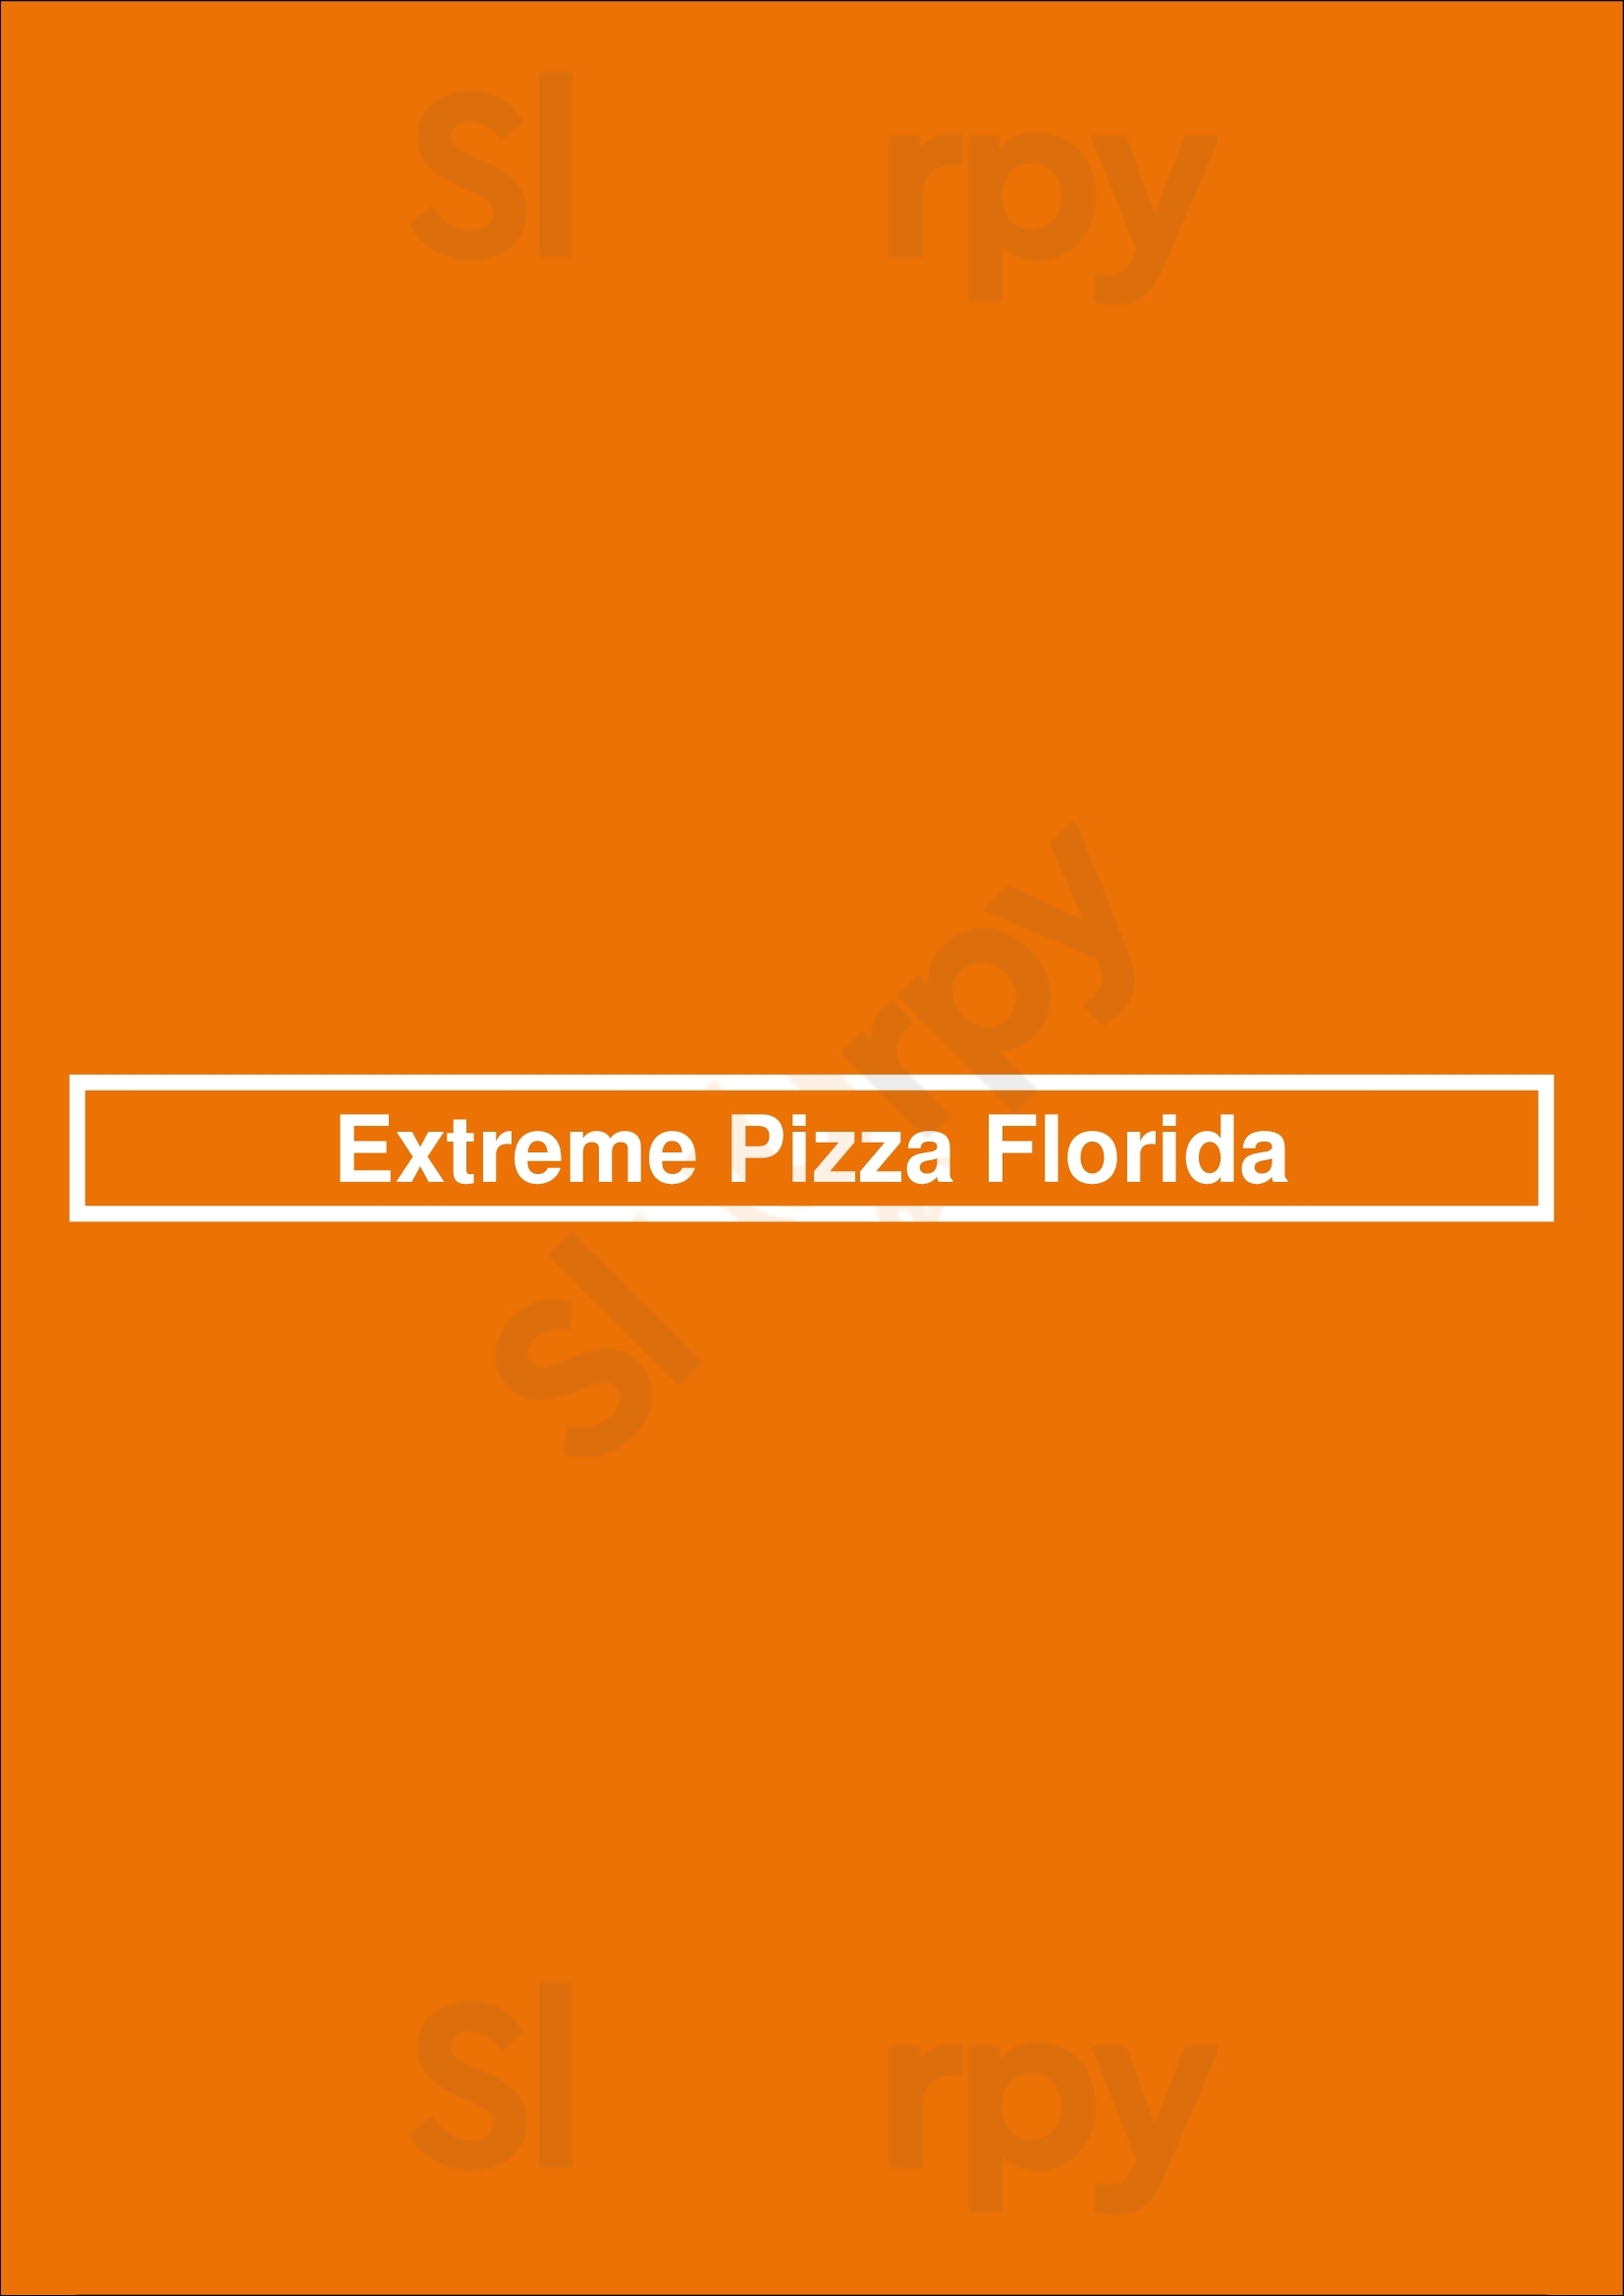 Extreme Pizza Florida Clearwater Menu - 1